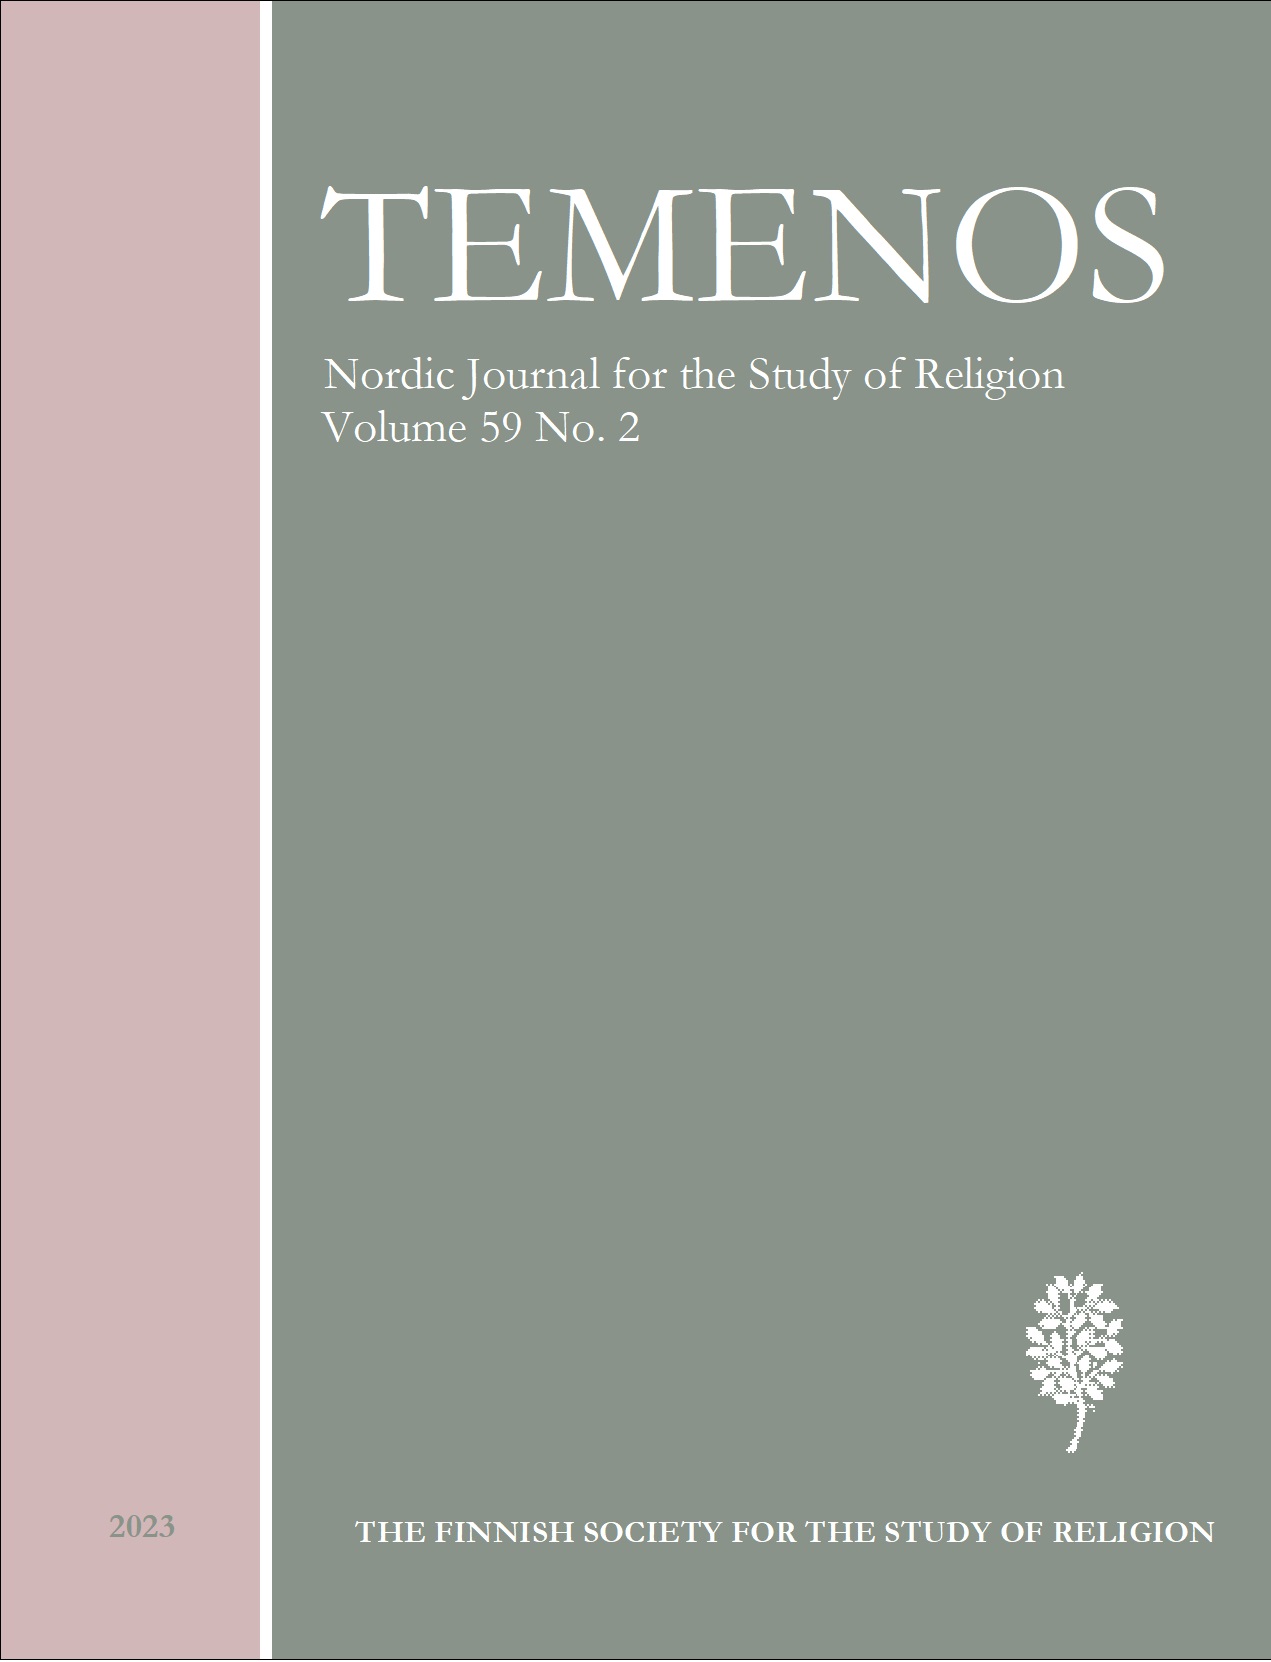 					View Vol. 59 No. 2 (2023): Temenos - Nordic Journal for the Study of Religion
				